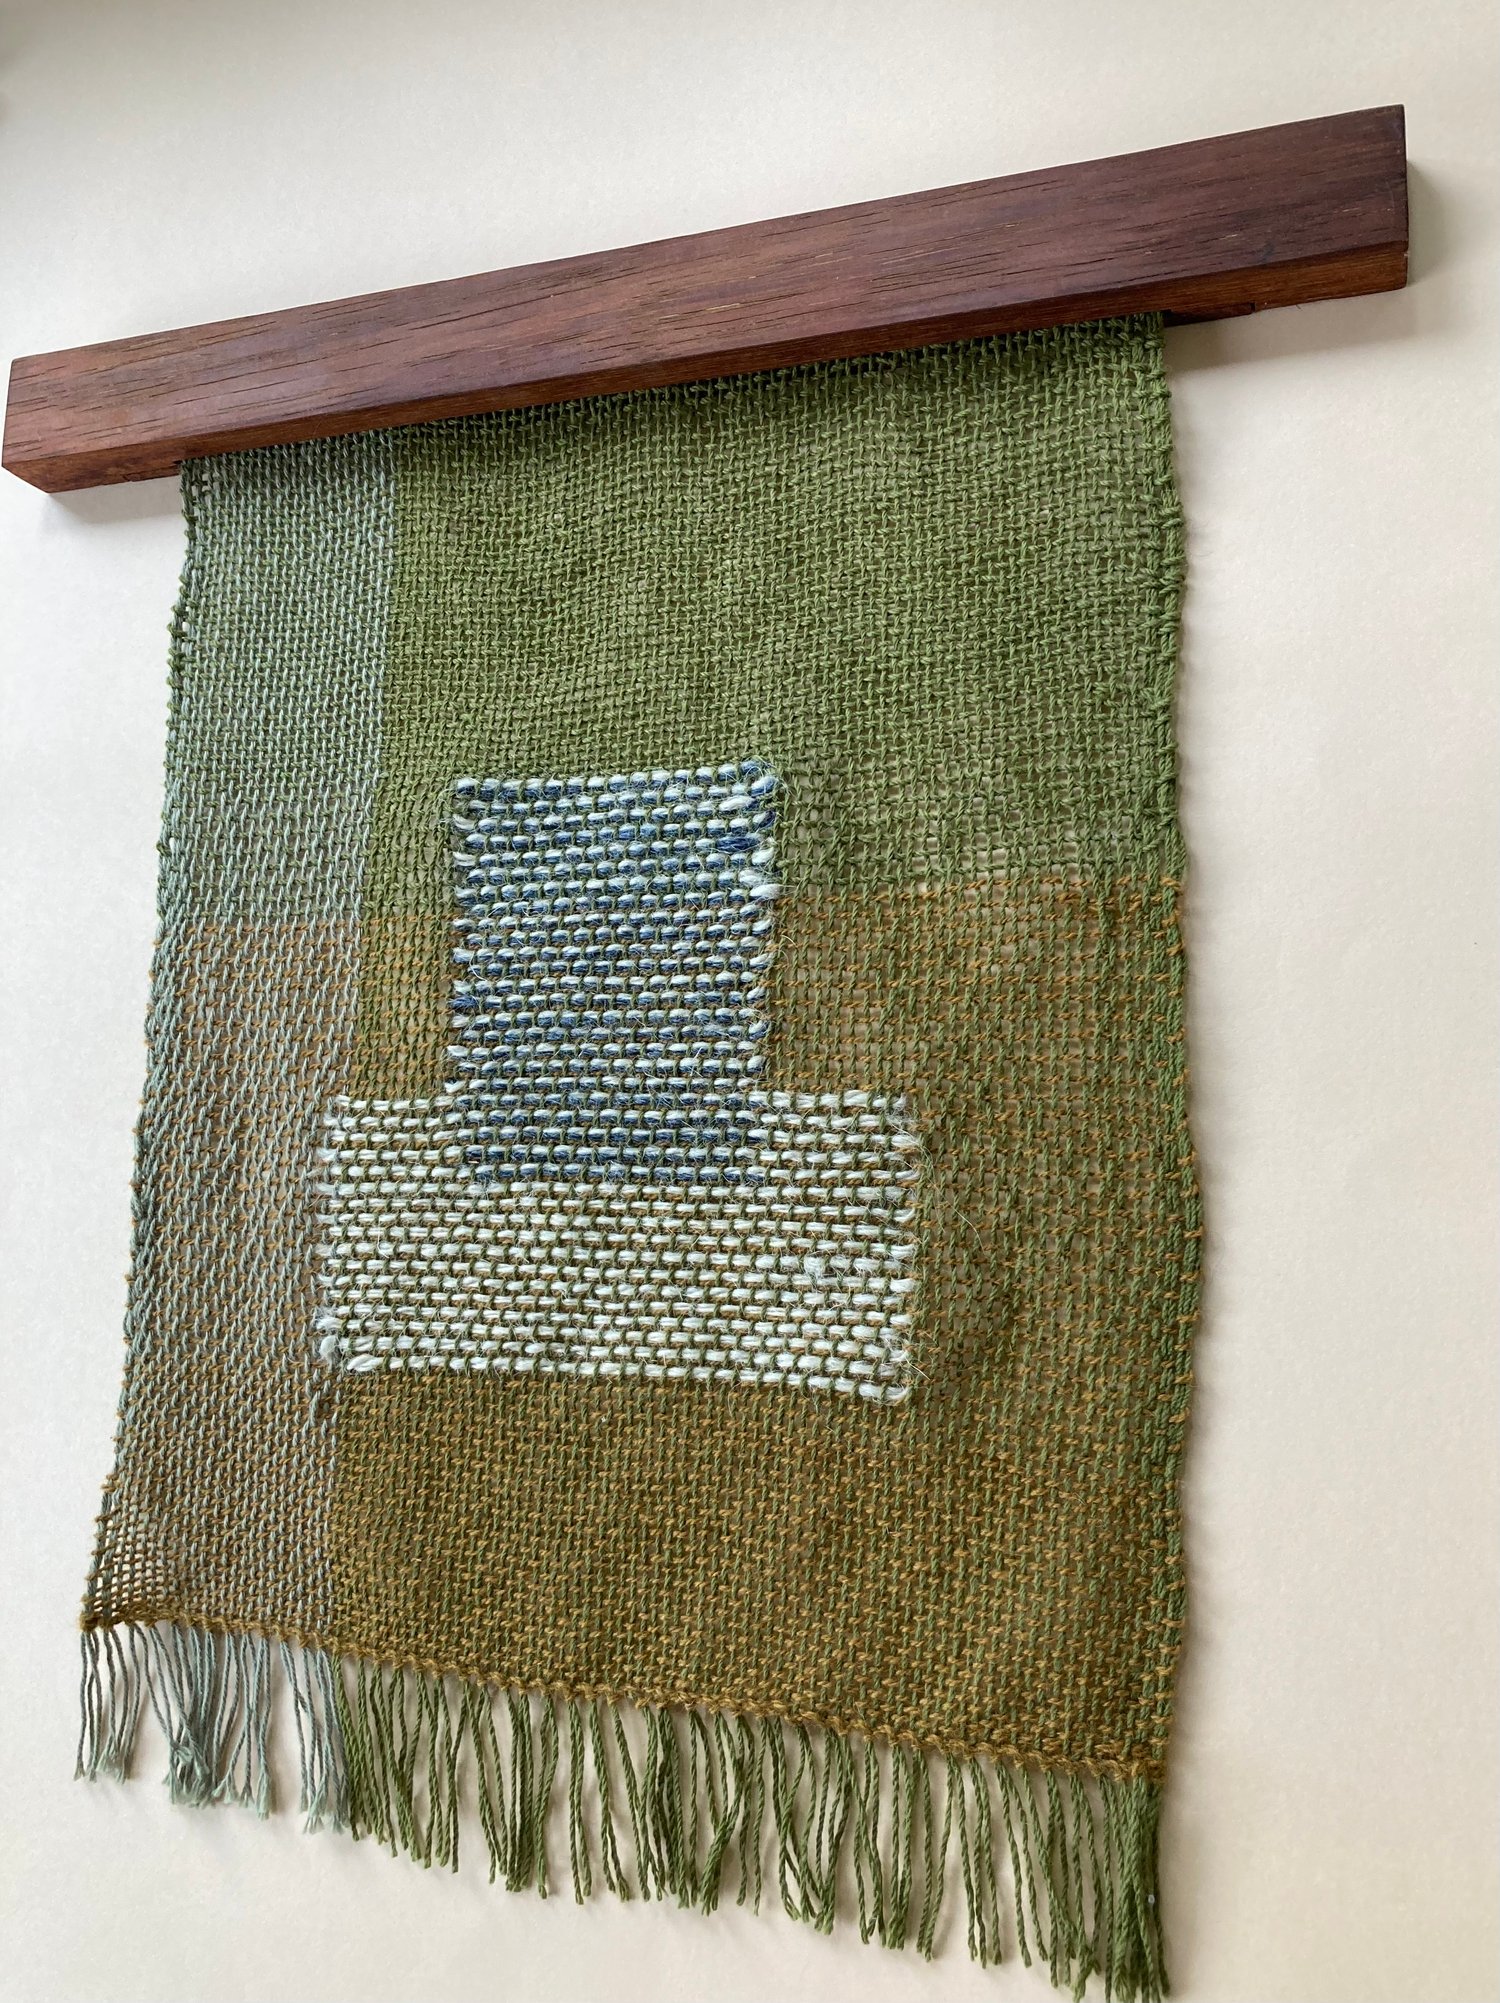 Image of ‘woven template’